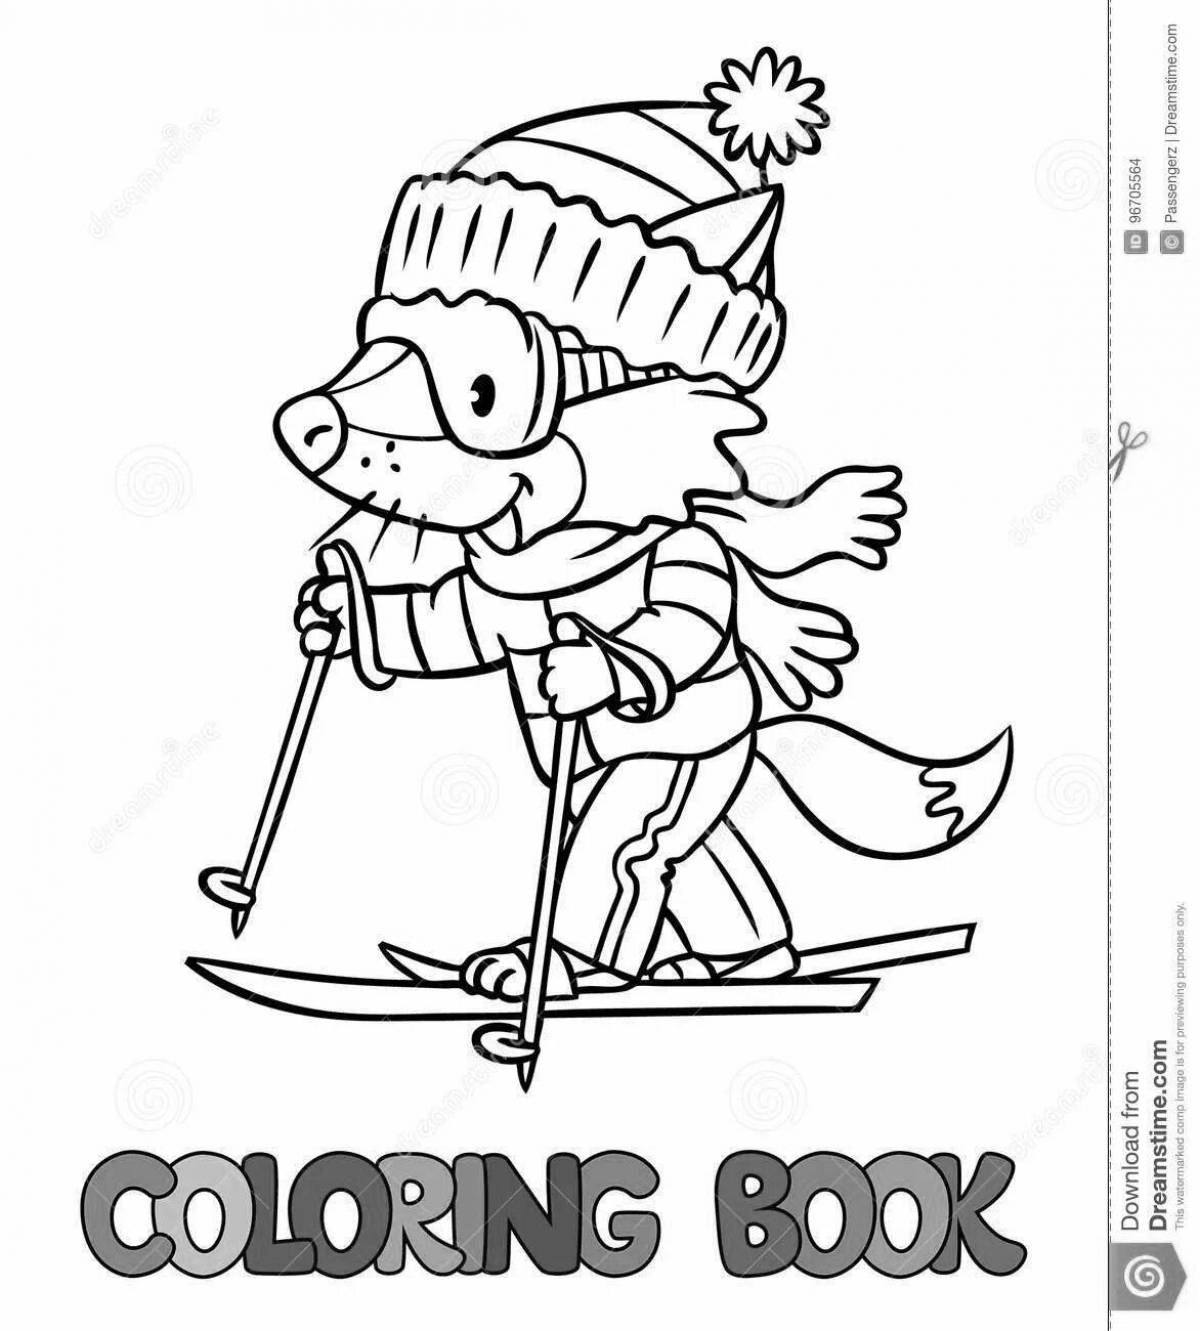 Coloring page spicy boy on skis